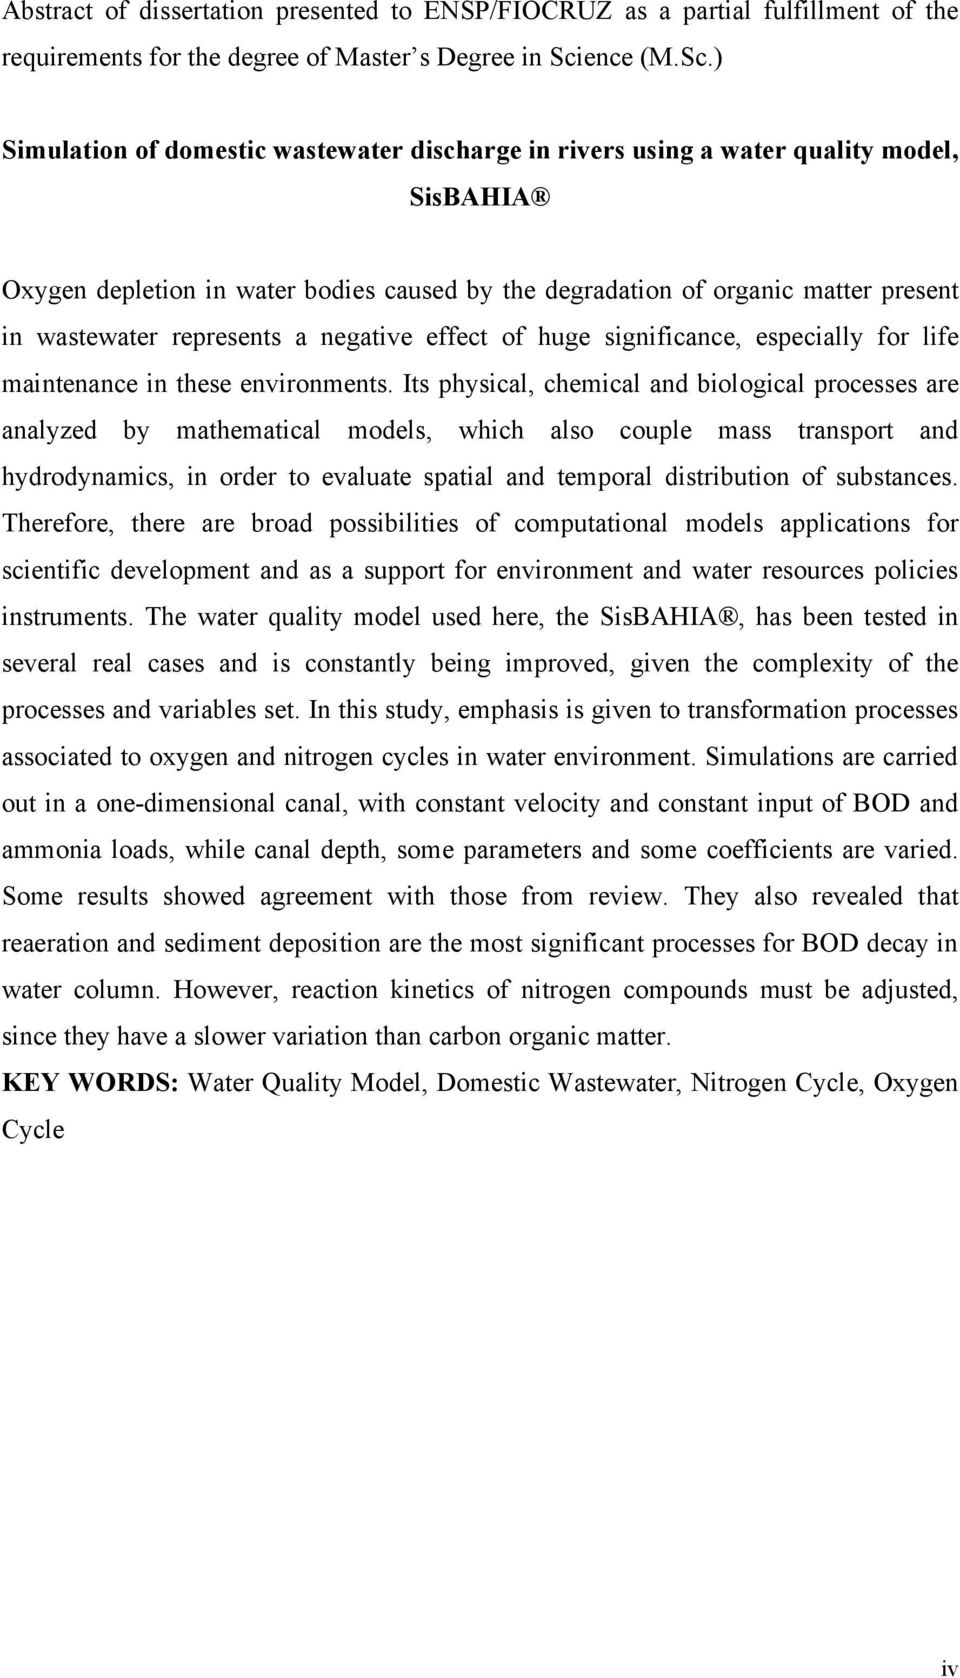 ) Simulation of domestic wastewater discharge in rivers using a water quality model, SisBAHIA Oxygen depletion in water bodies caused by the degradation of organic matter present in wastewater